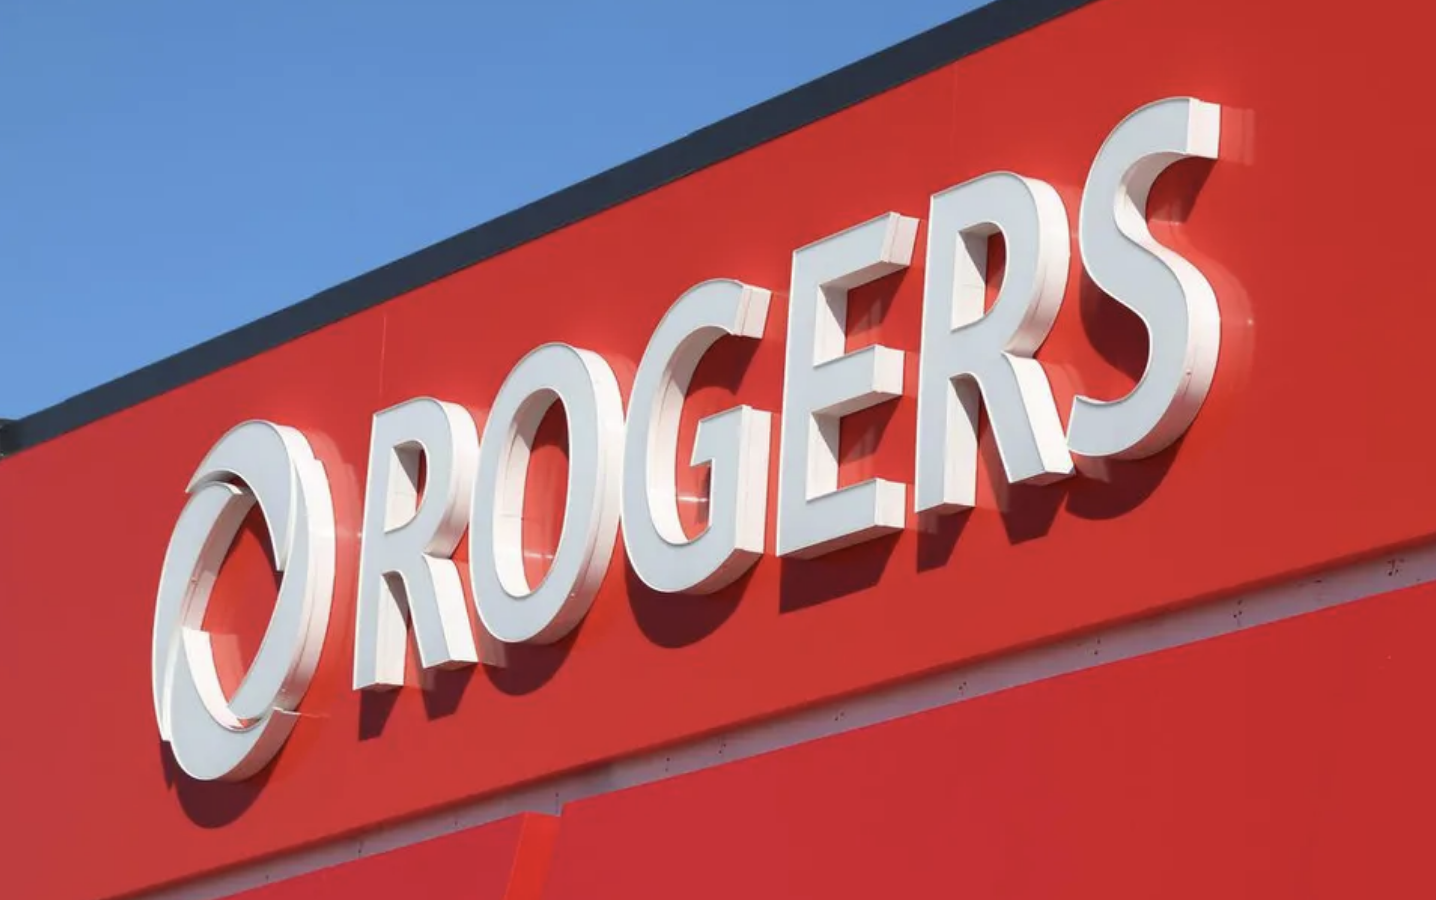 Rogers outage affects wireless, internet customers across Canada